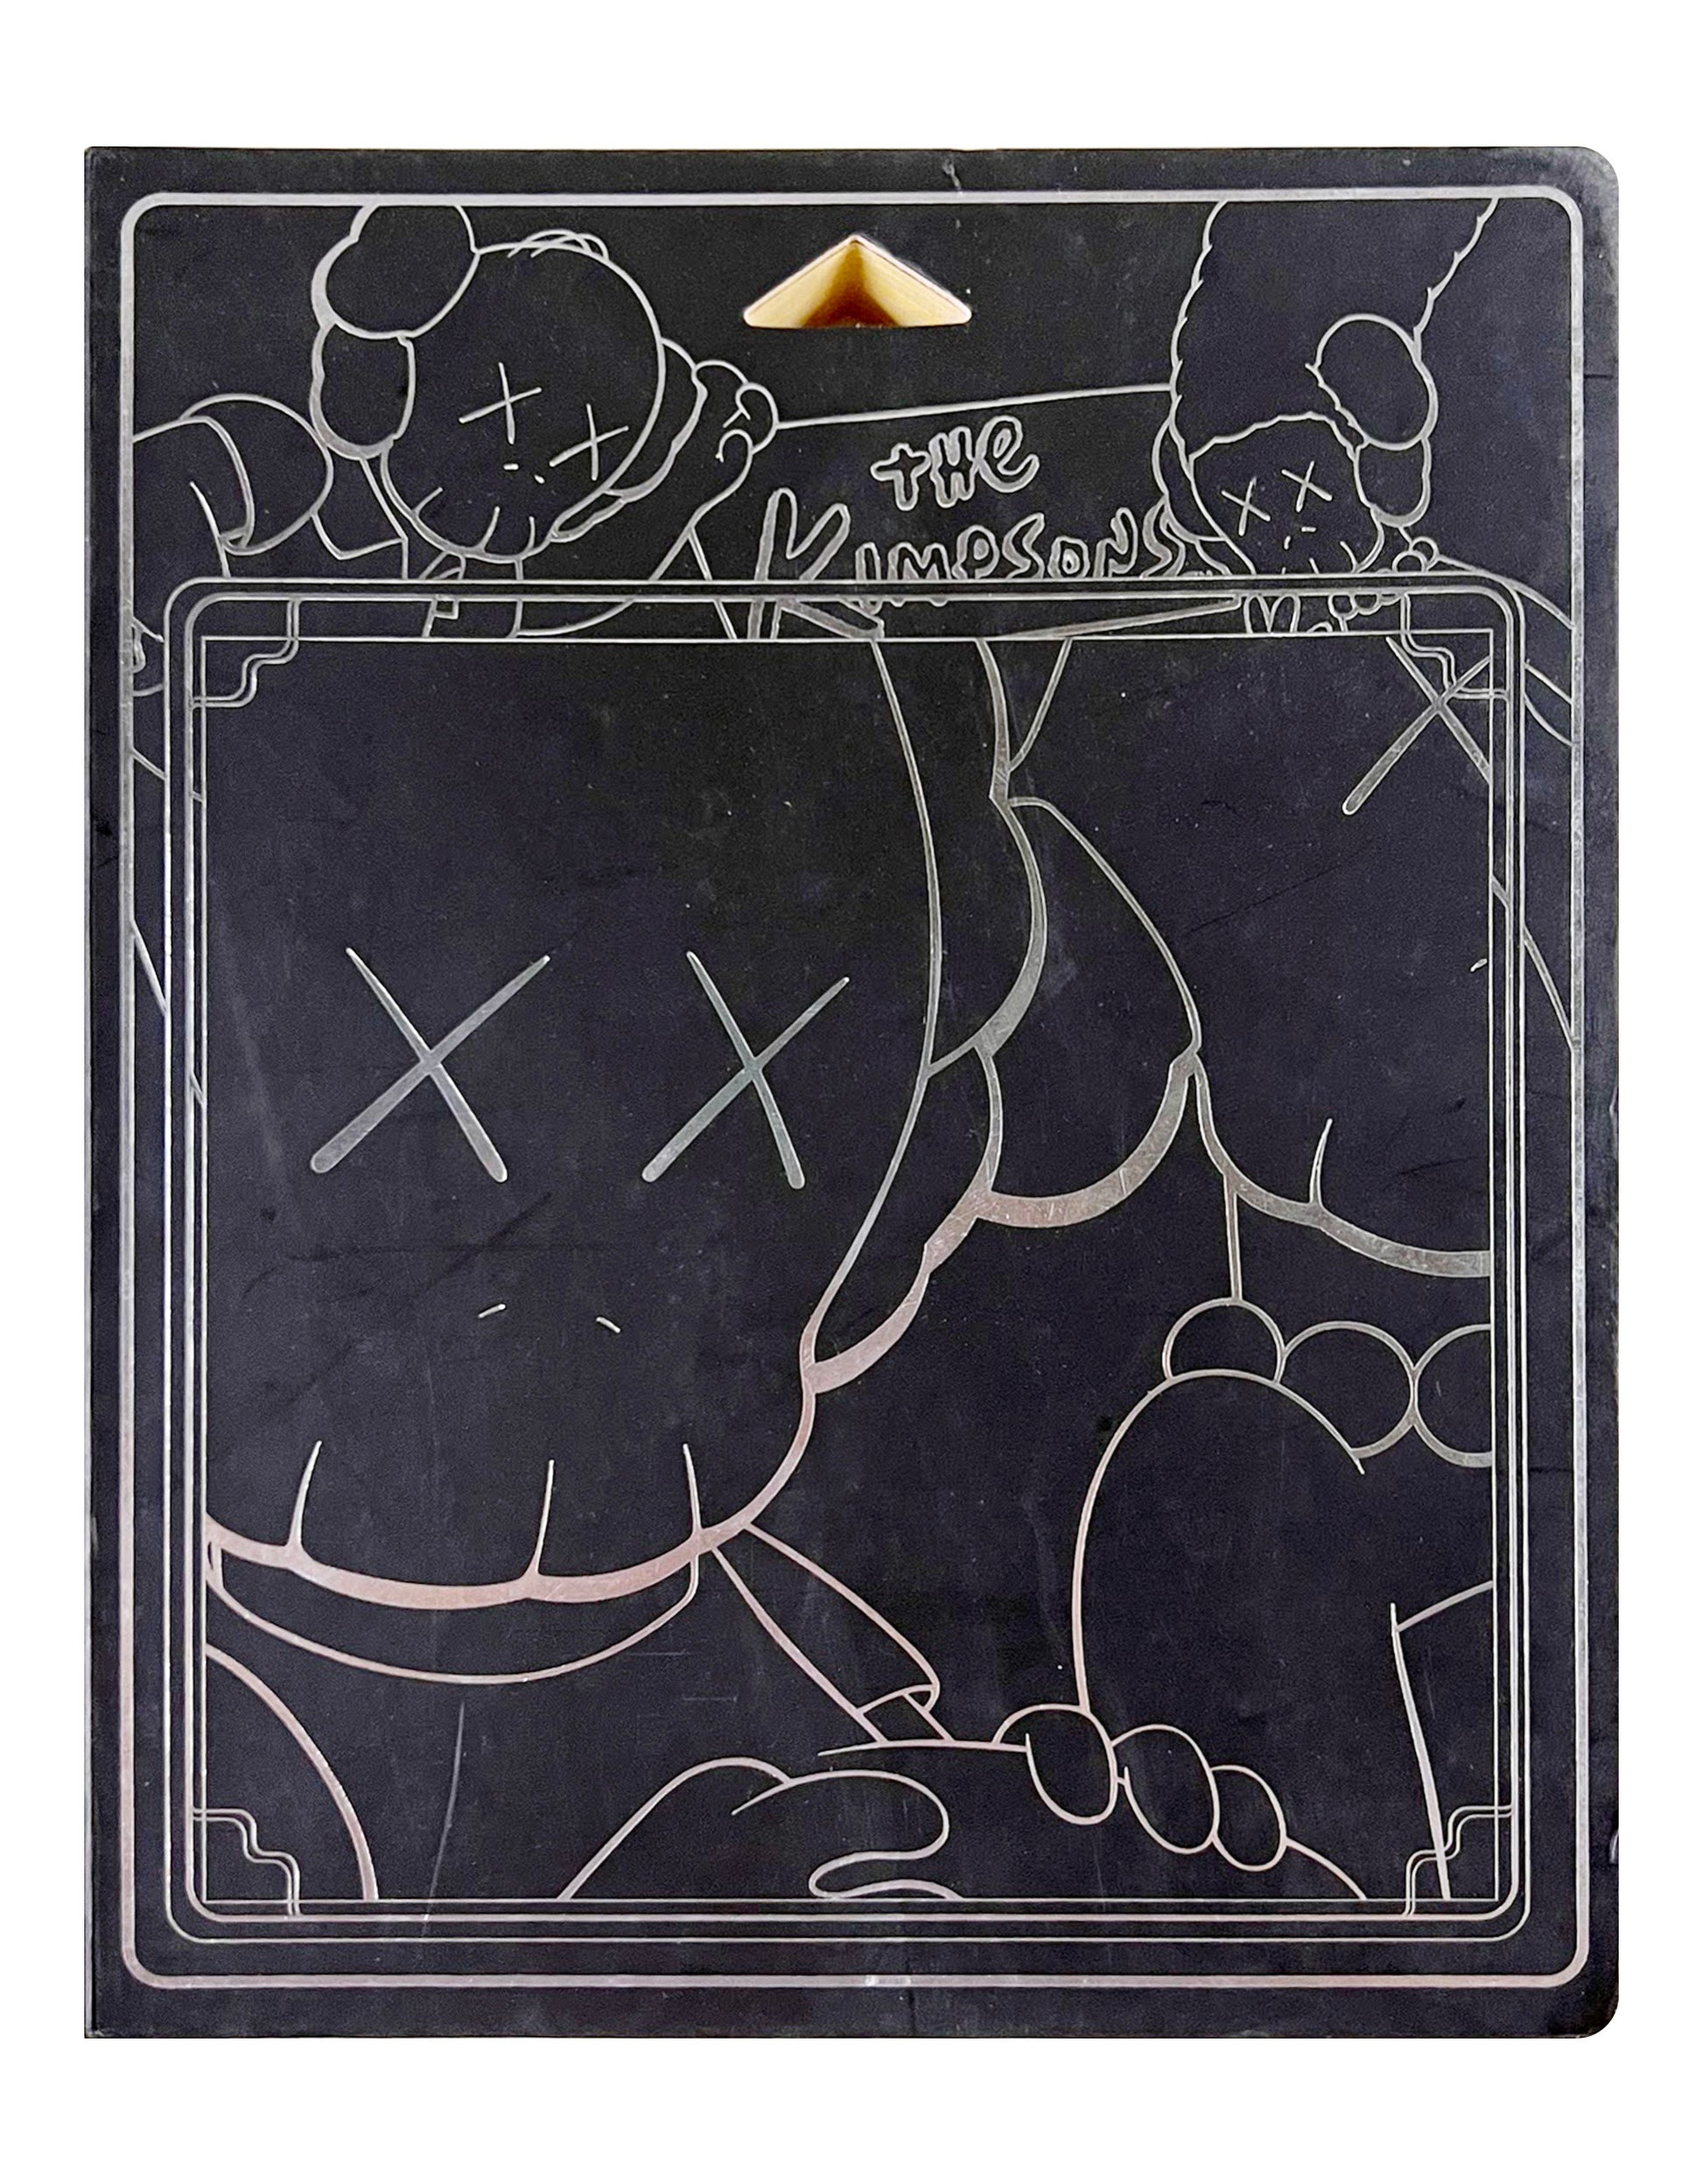 KAWS: WHAT PARTY - Hardcover